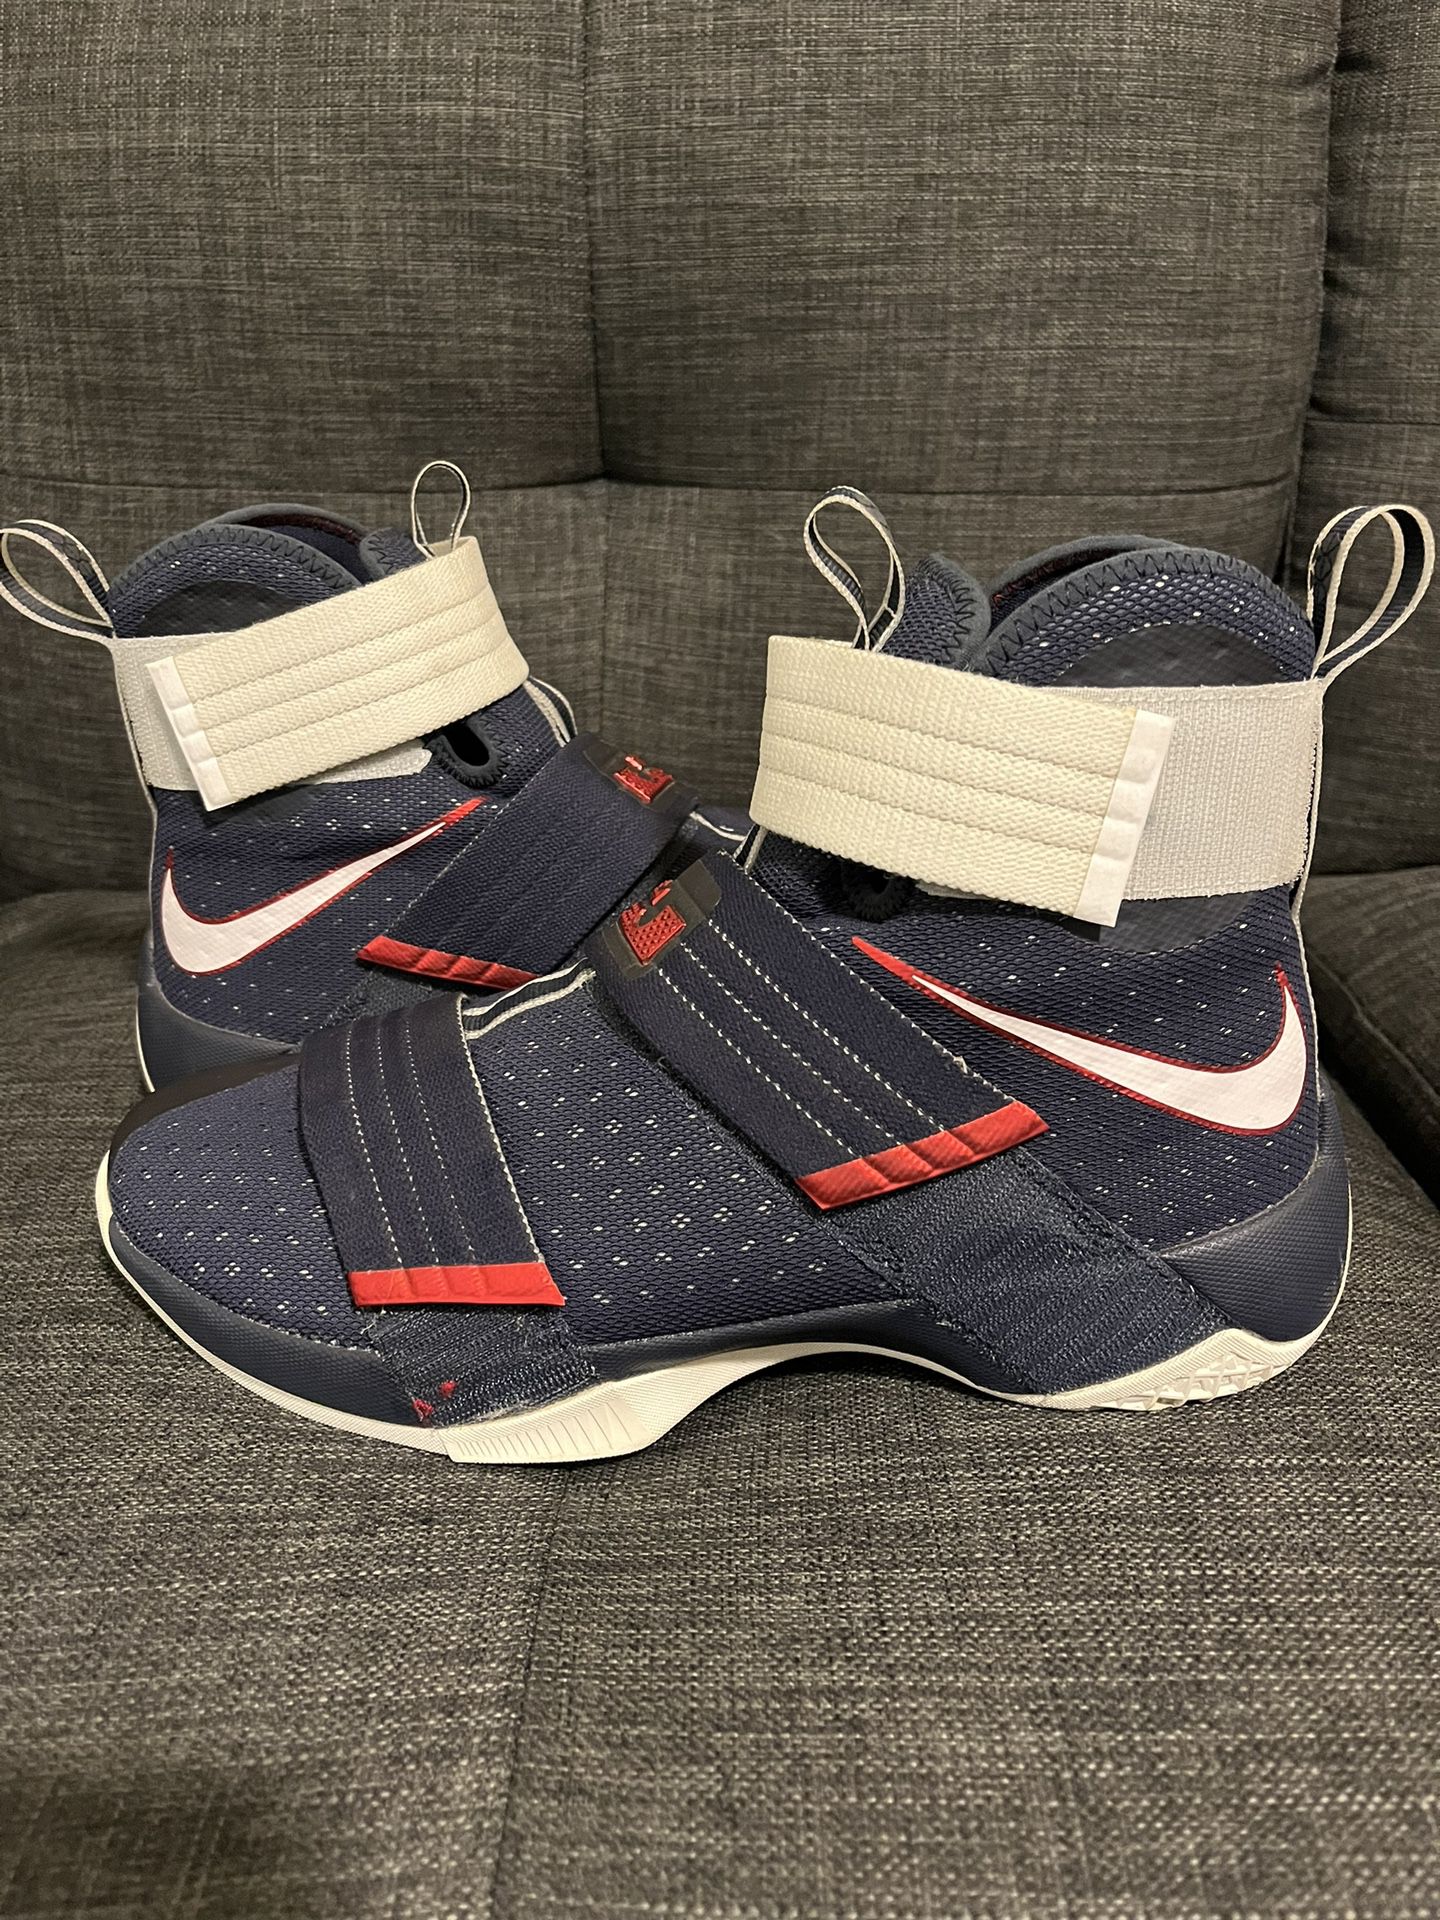 Lebron Zoom Soldier  10 USA